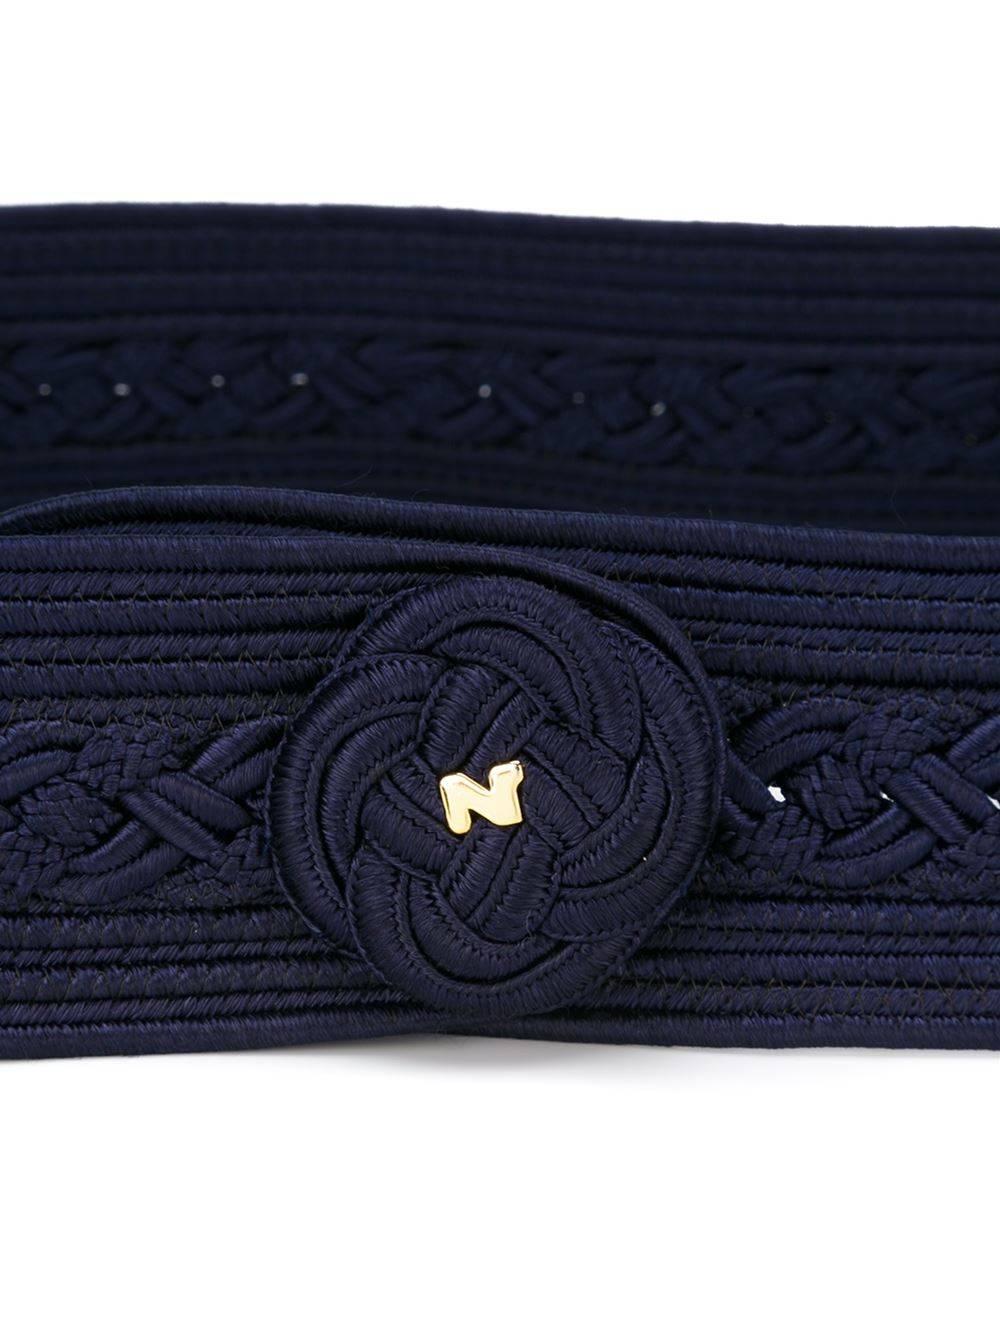 Navy blue satin passementerie belt from Nina Ricci Vintage. Early 80s. Adjustable size. Excellent vintage condition. Size : width: 5 cm - 2 in, total length: 85 cm - 33.5 in. 
Perfect gift and so elegant !